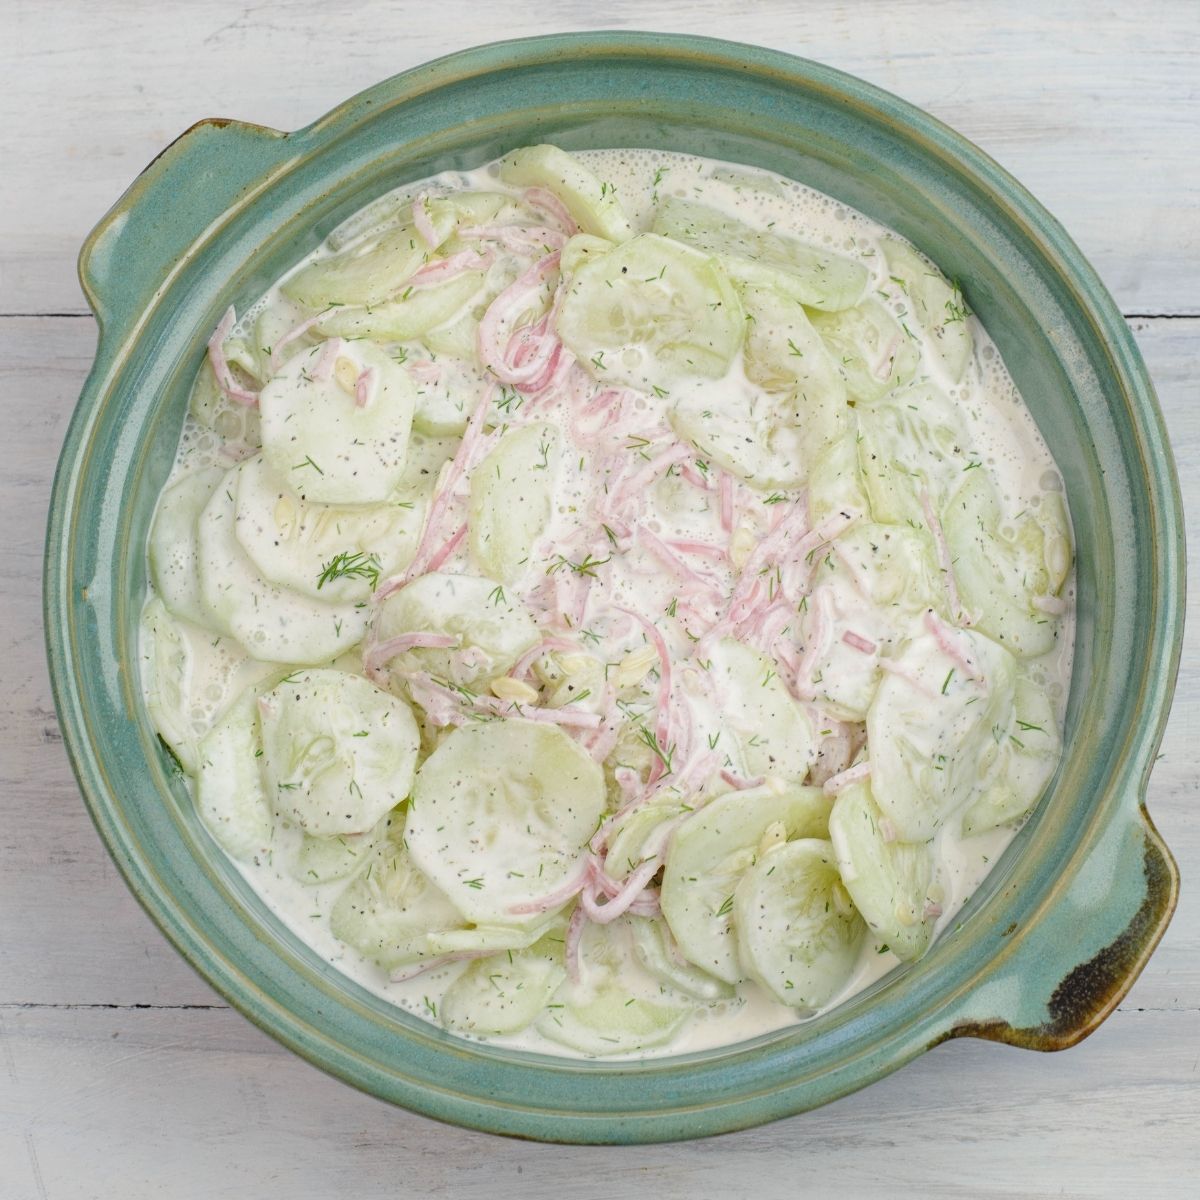 A ceramic serving bowl filled with a creamy cucumber salad.